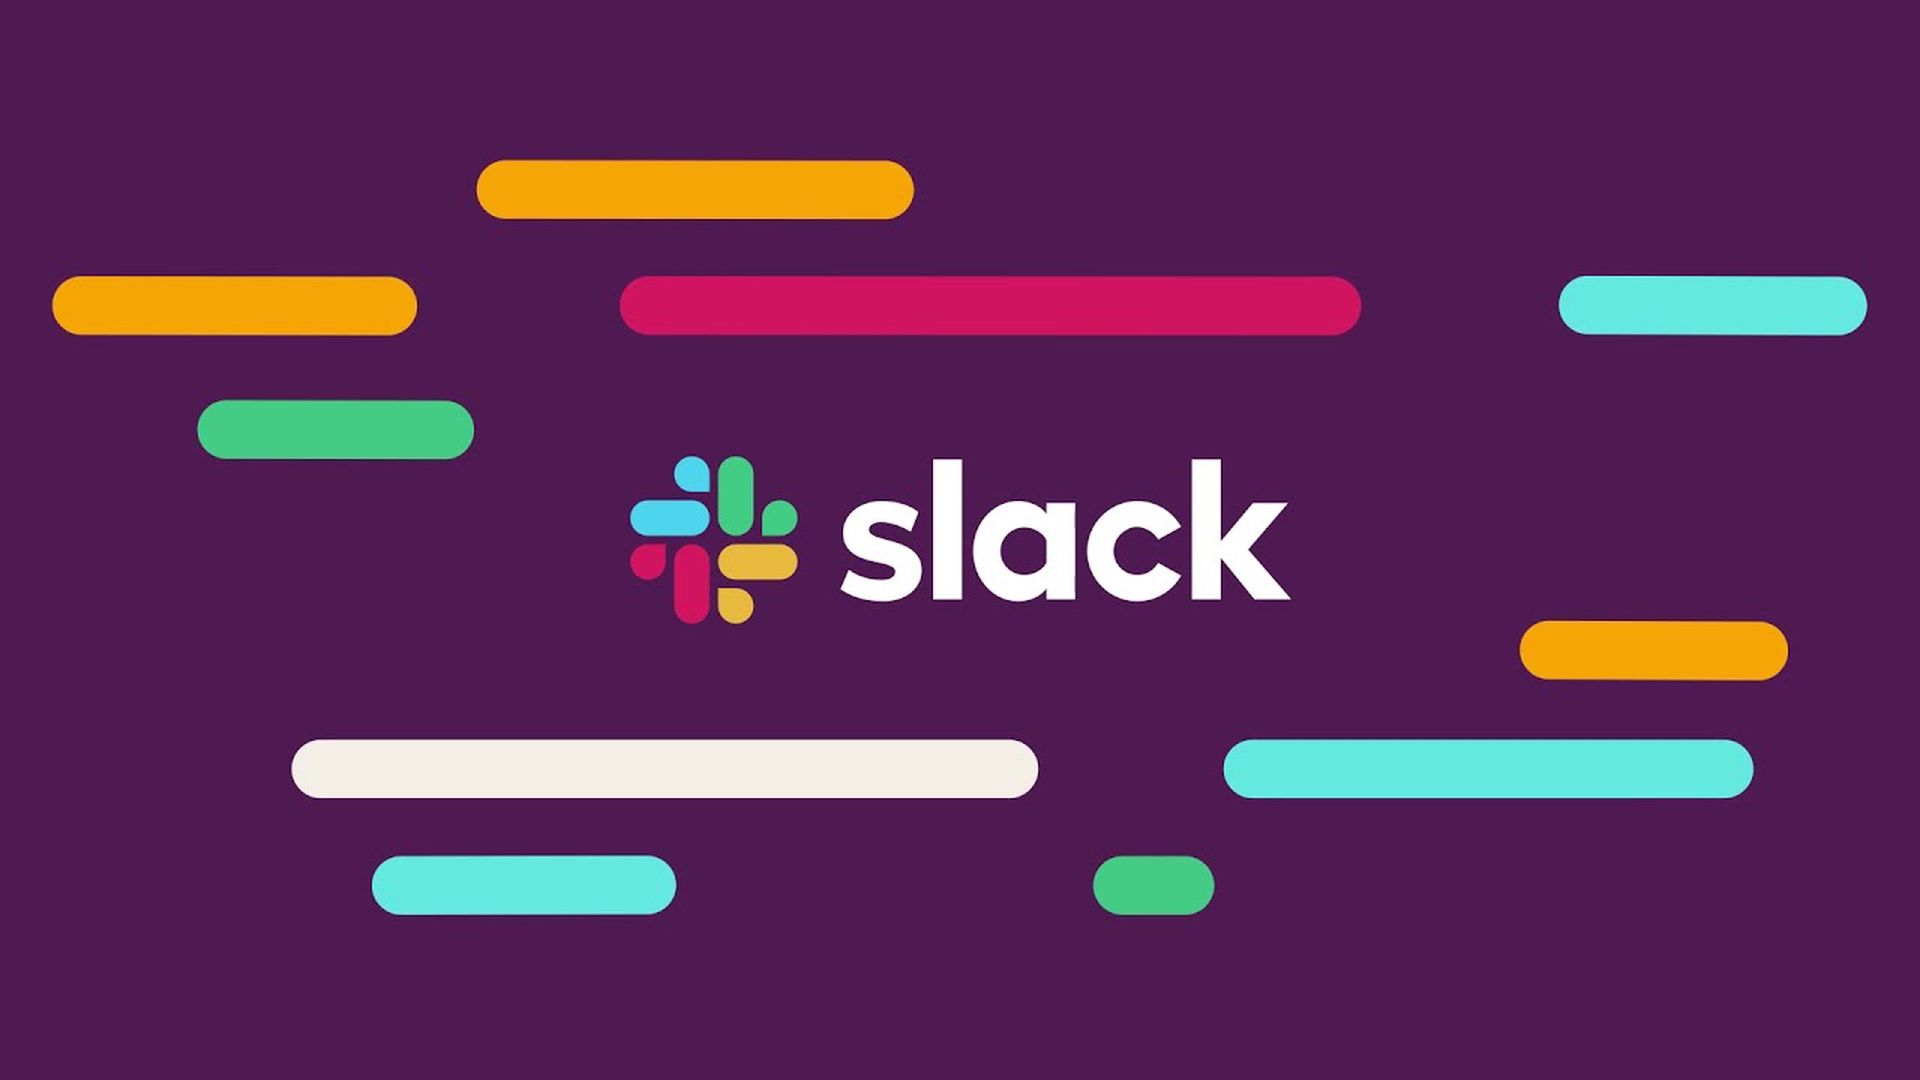 In this article, we are going to go over how to leave a Slack workspace, as well as answer the question: "How to leave Slack channel?"